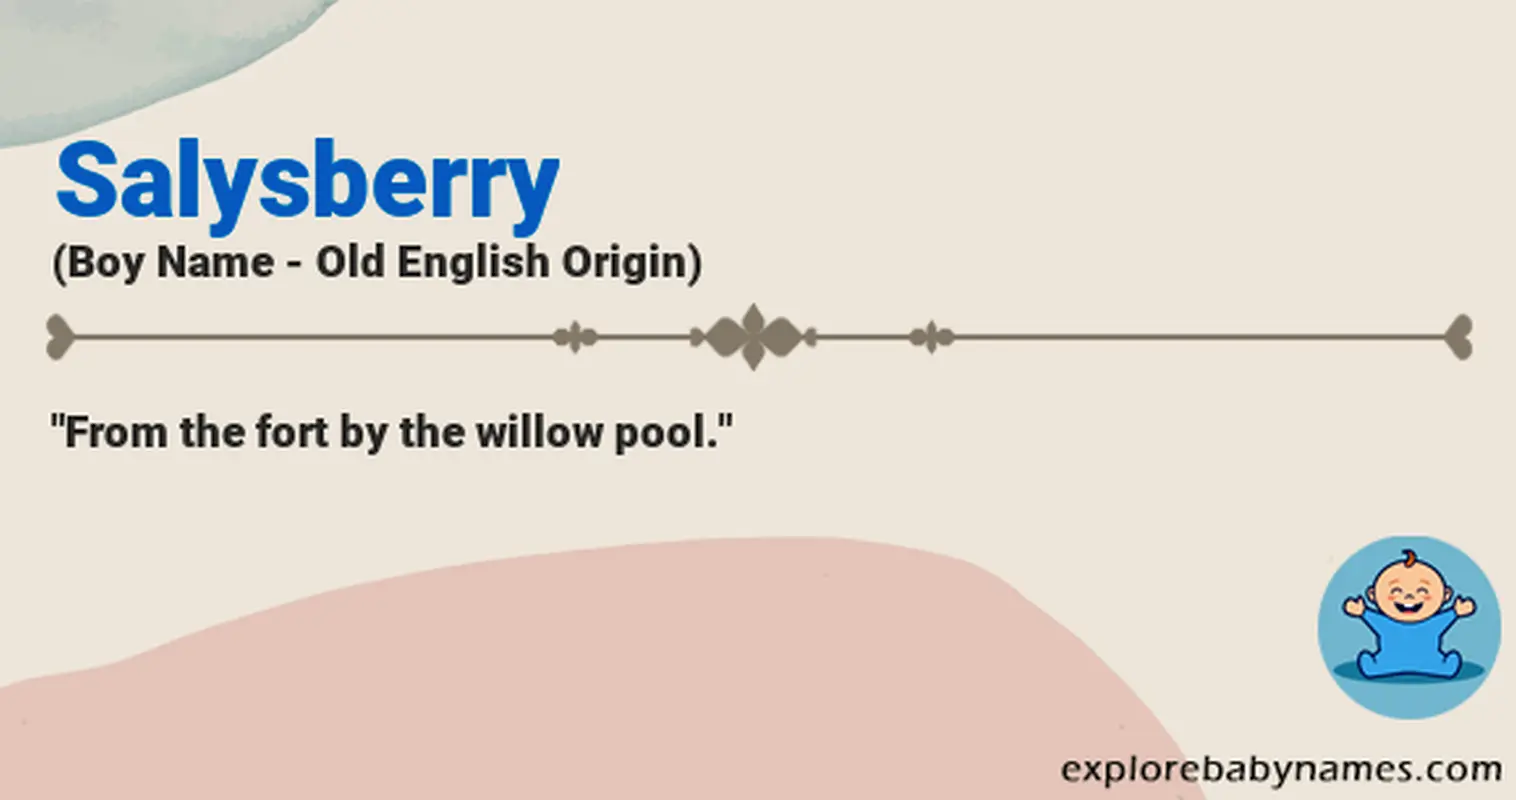 Meaning of Salysberry